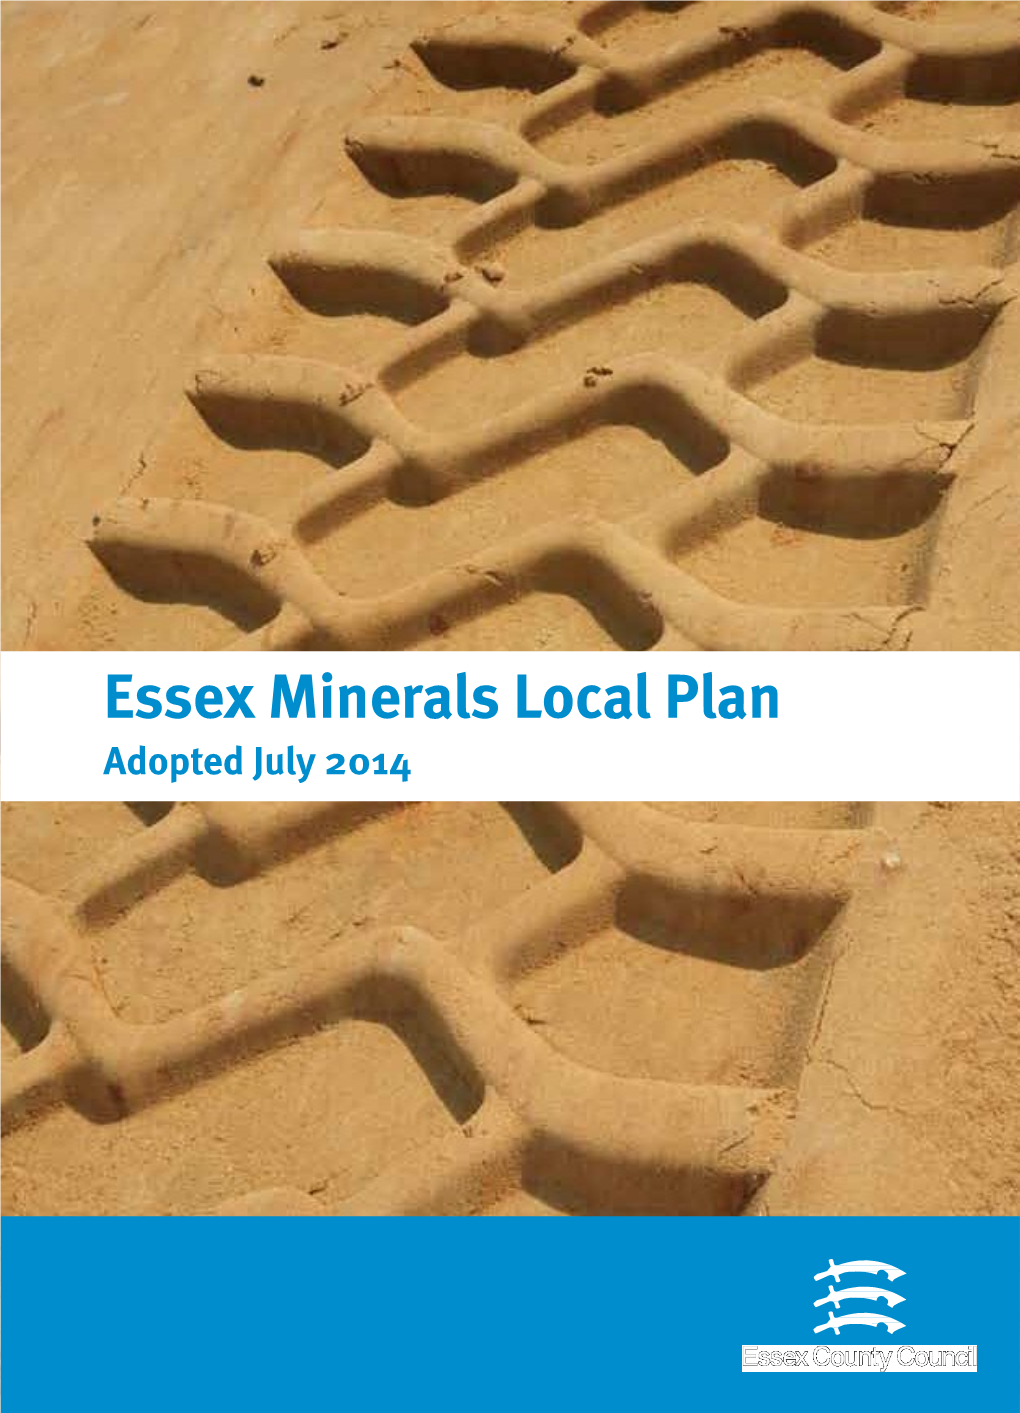 Essex and Southend Minerals Local Plan 2014